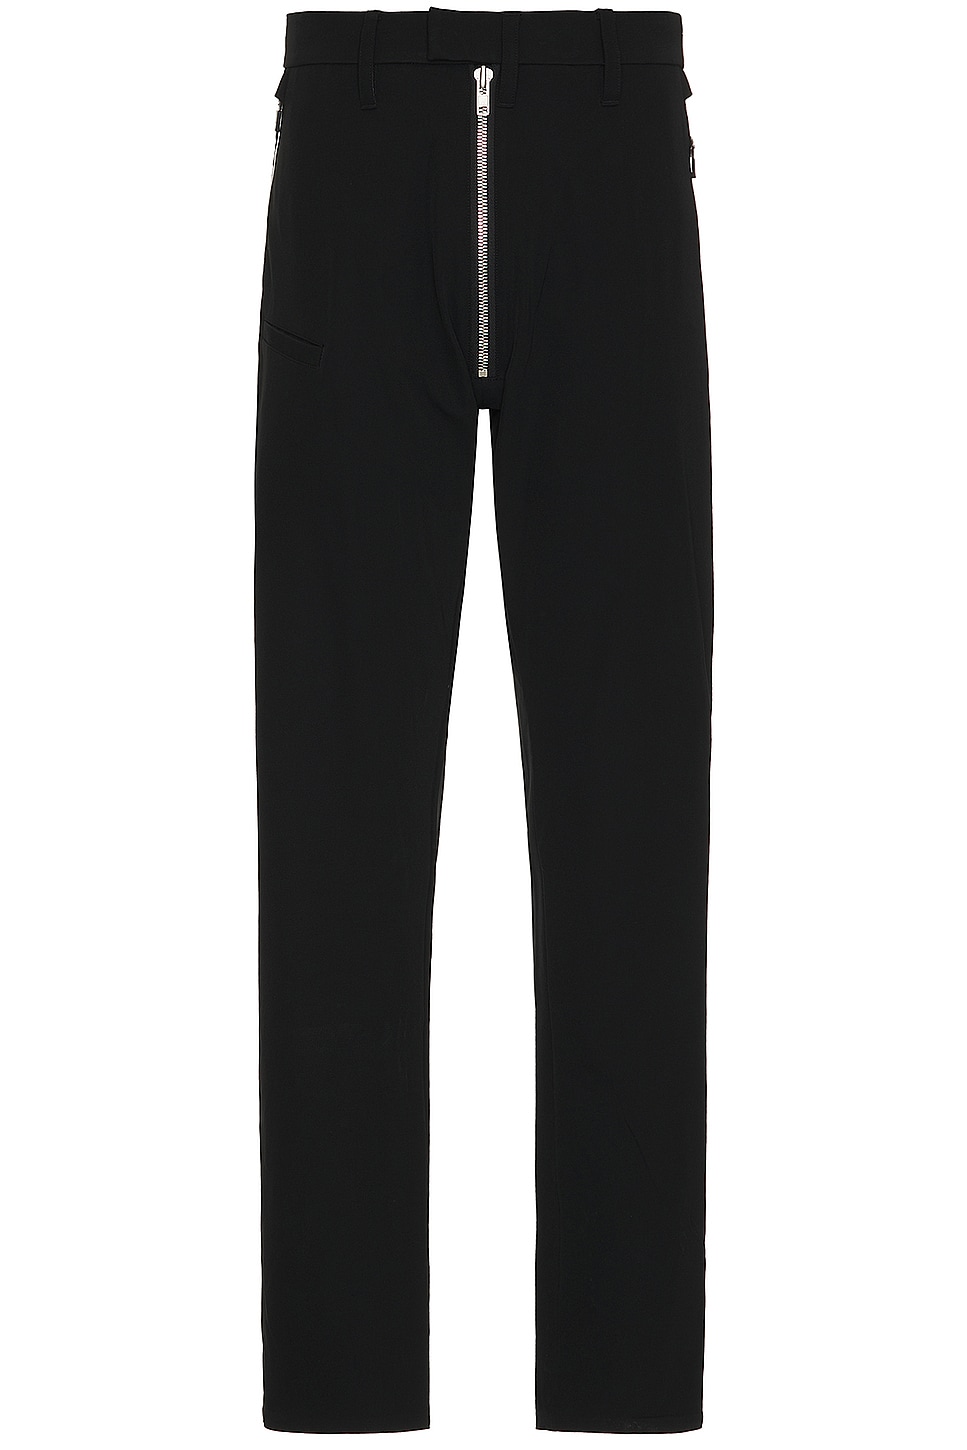 Image 1 of Acronym P47A-DS Schoeller Dryskin Pant in Black